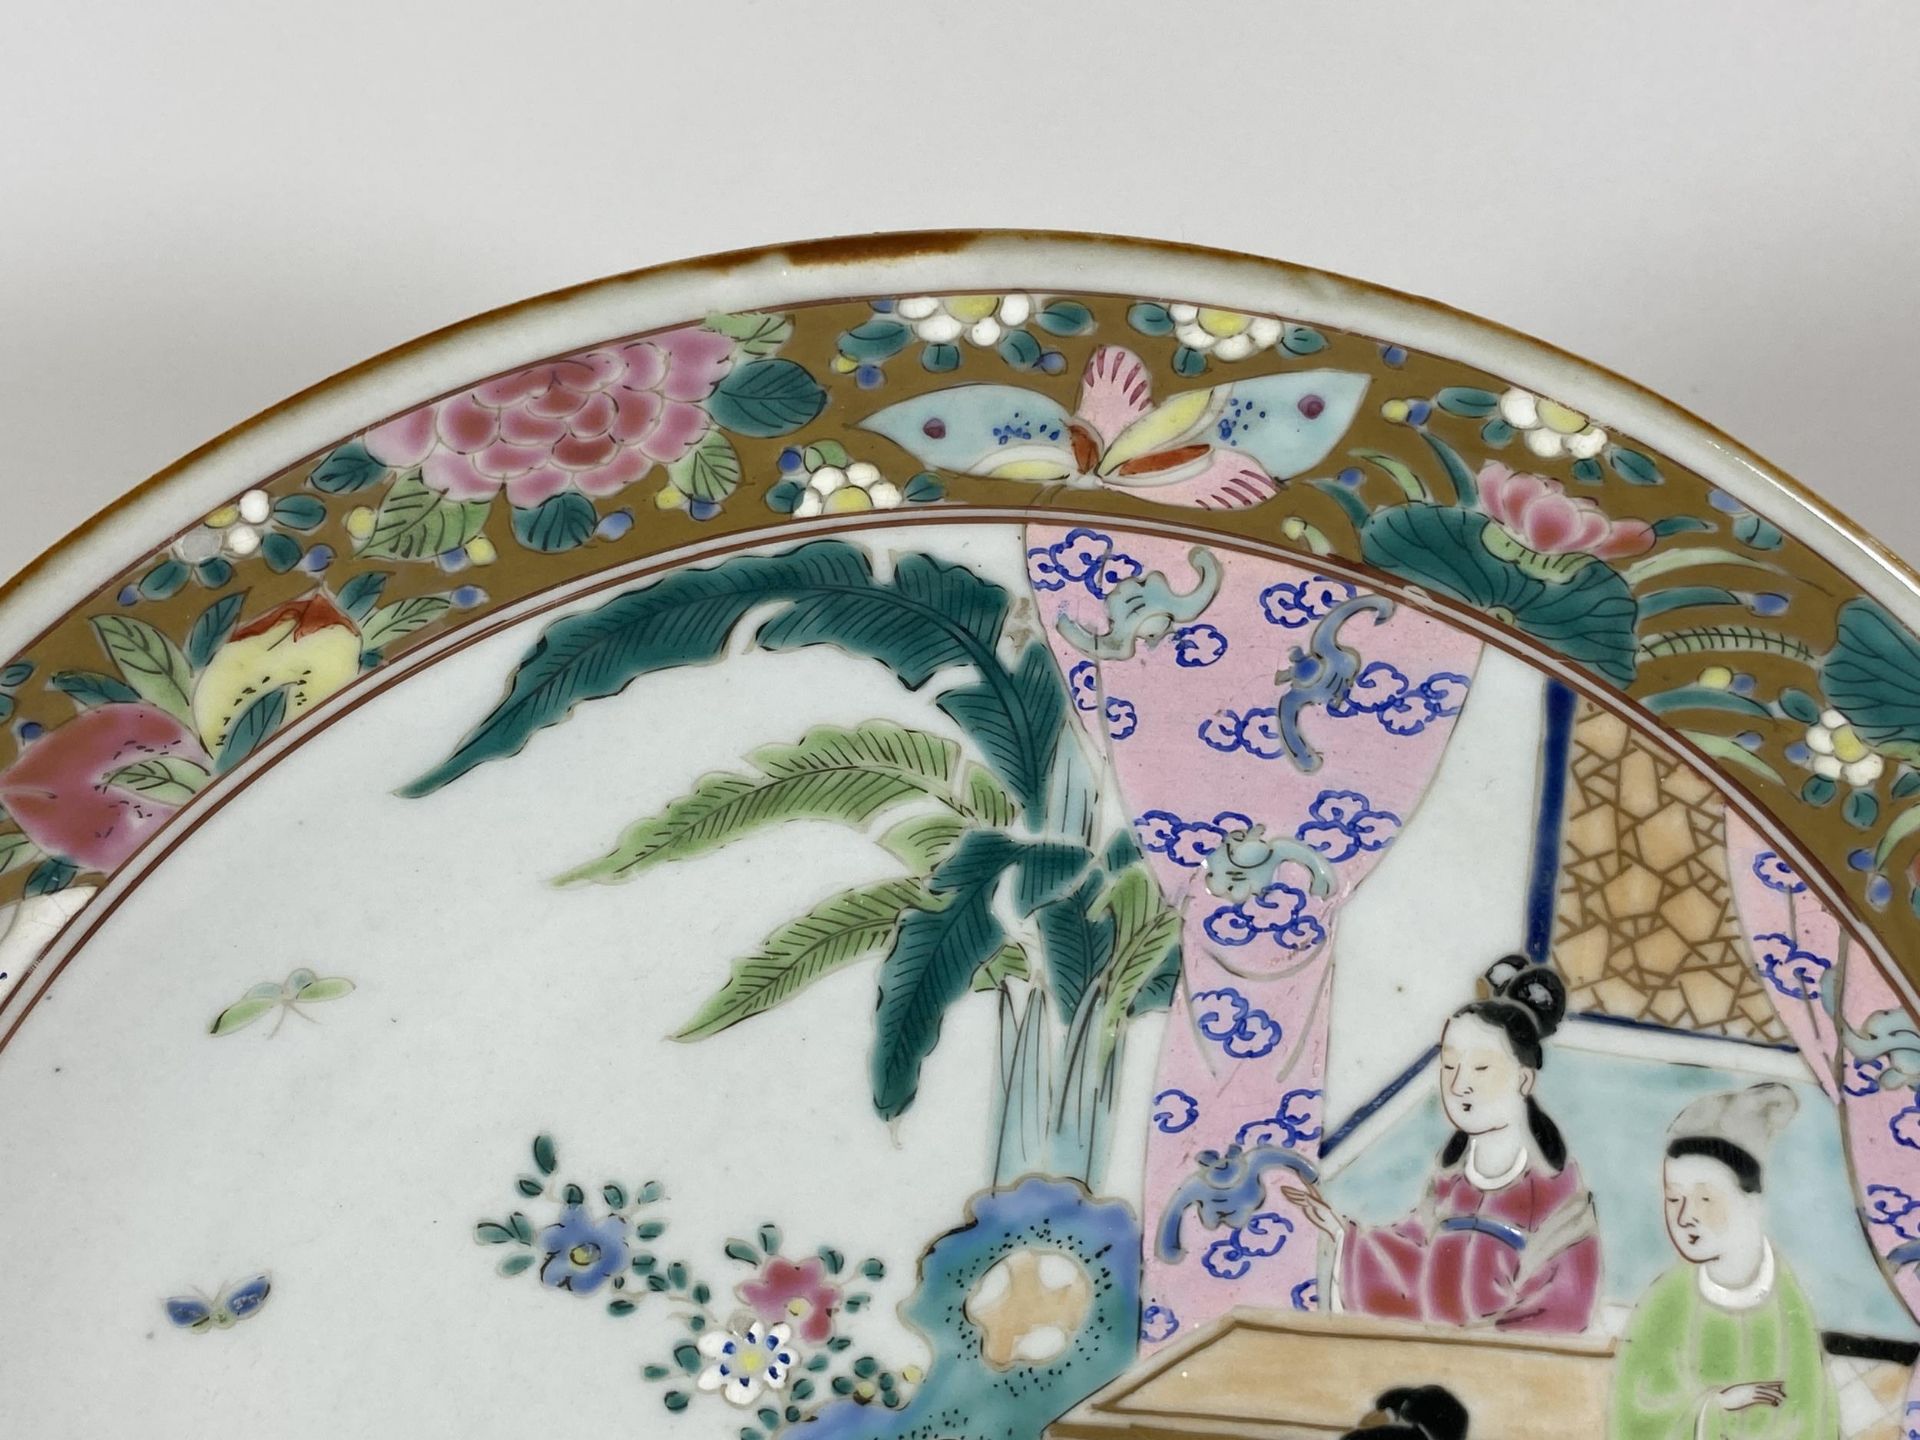 A LARGE CHINESE FAMILLE ROSE PORCELAIN CHARGER WITH FIGURAL DESIGN, SIGNED TO BASE, DIAMETER 31CM - Image 3 of 7